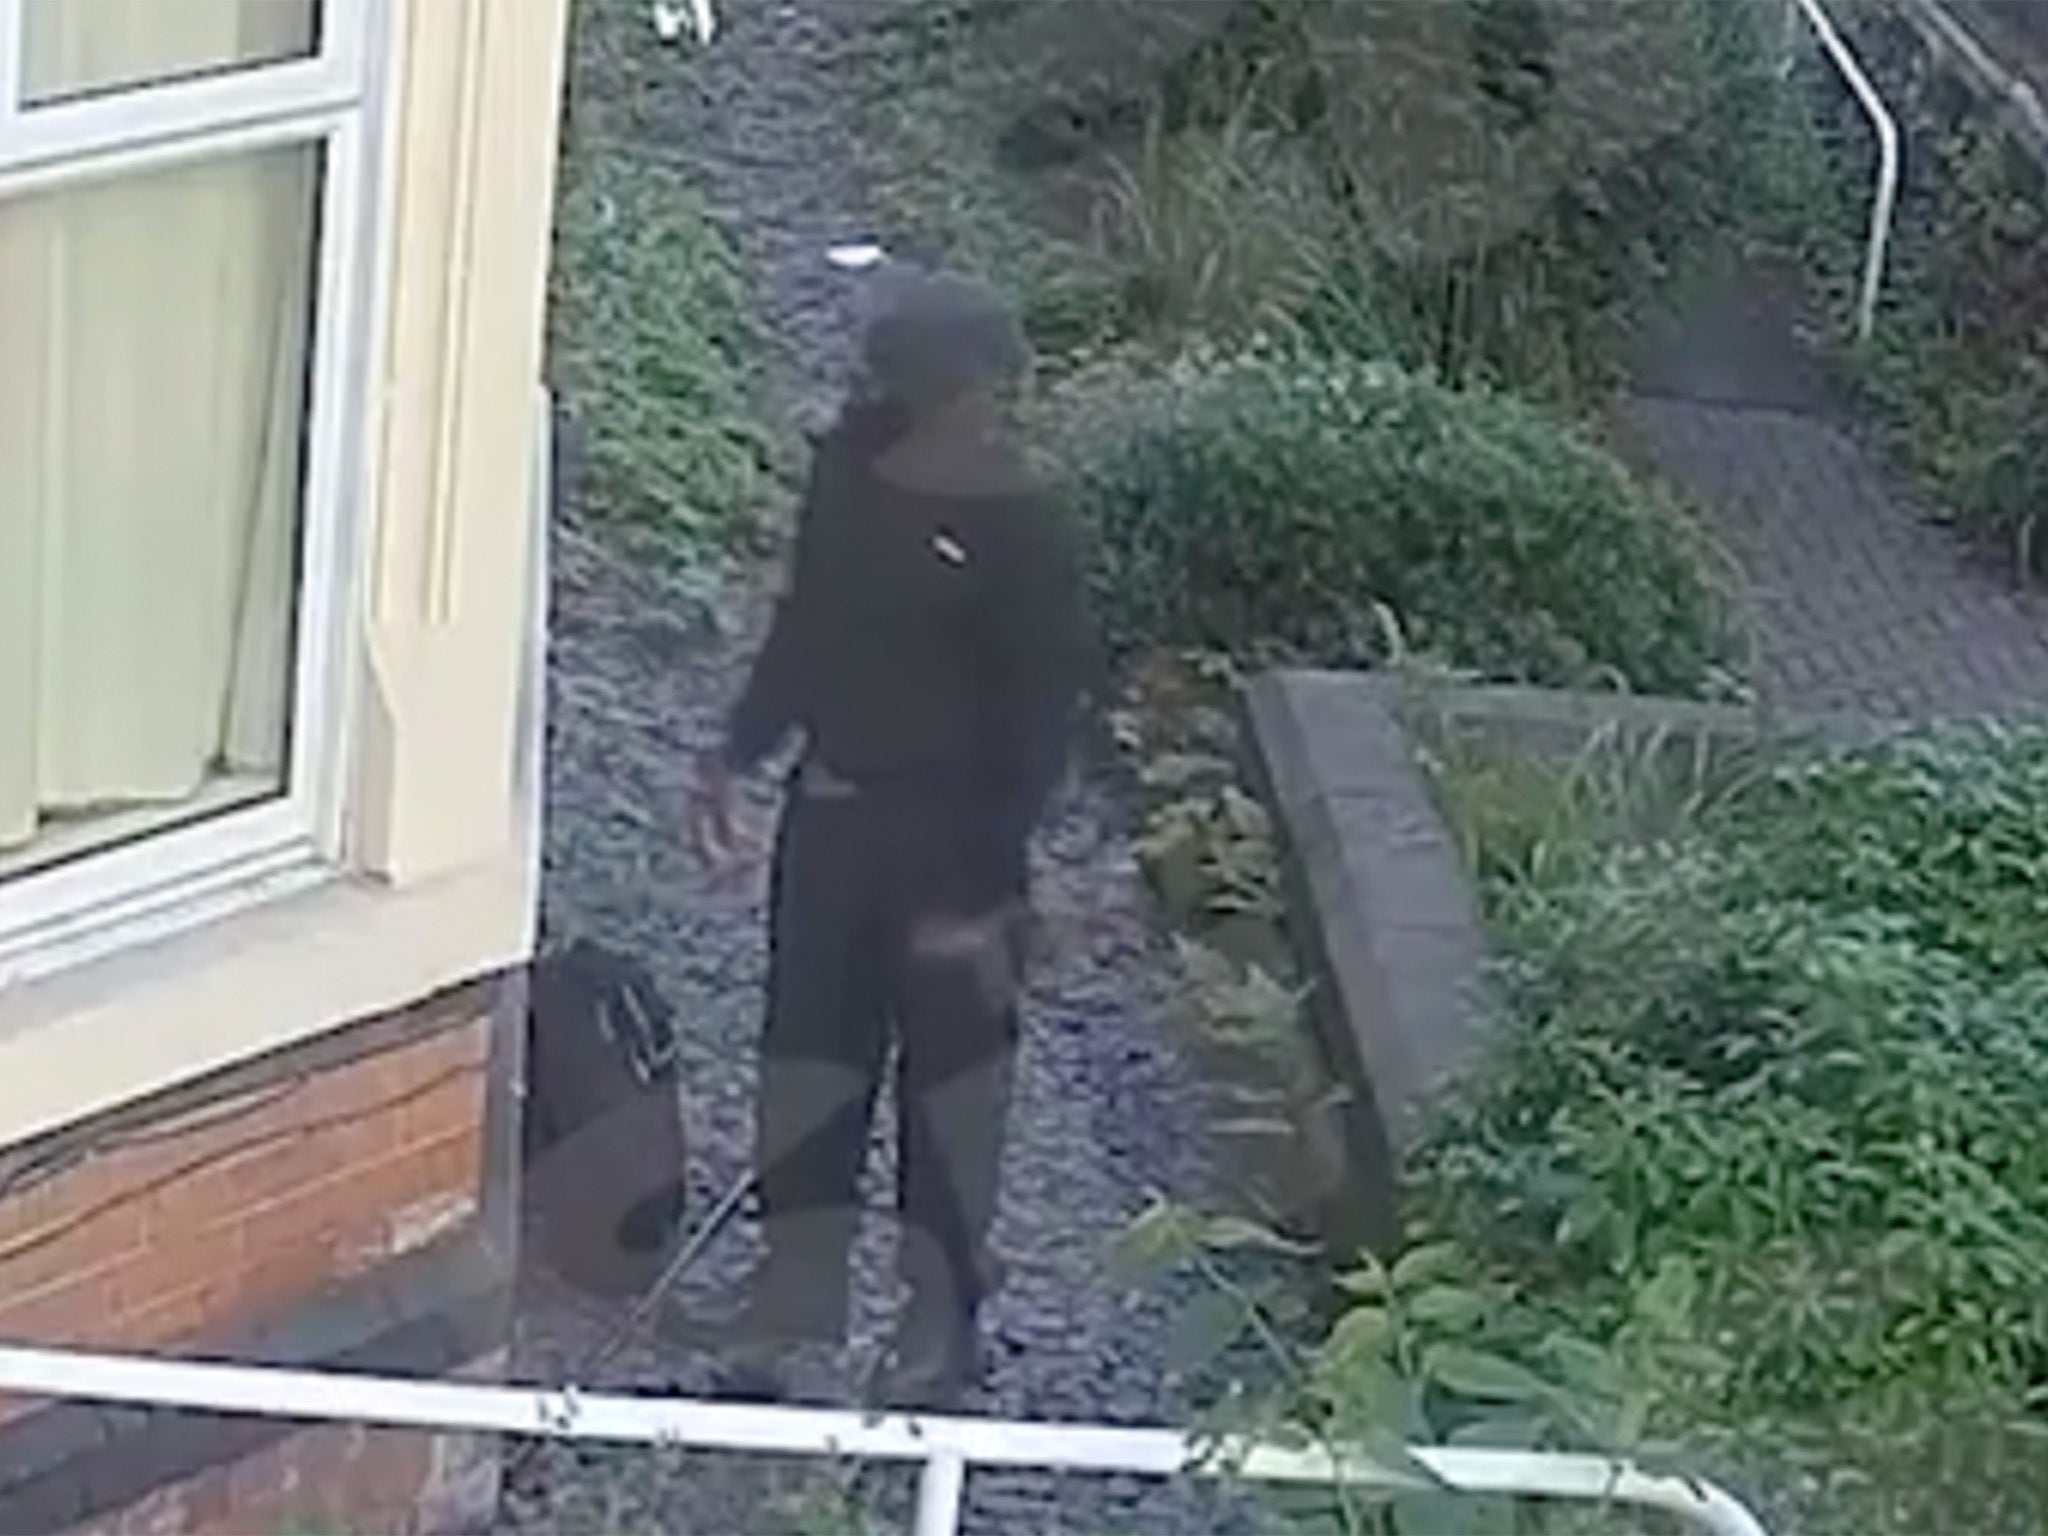 A man thought to be the suspect is believed to have tried to gain access to a residential care home on Mapperley Road